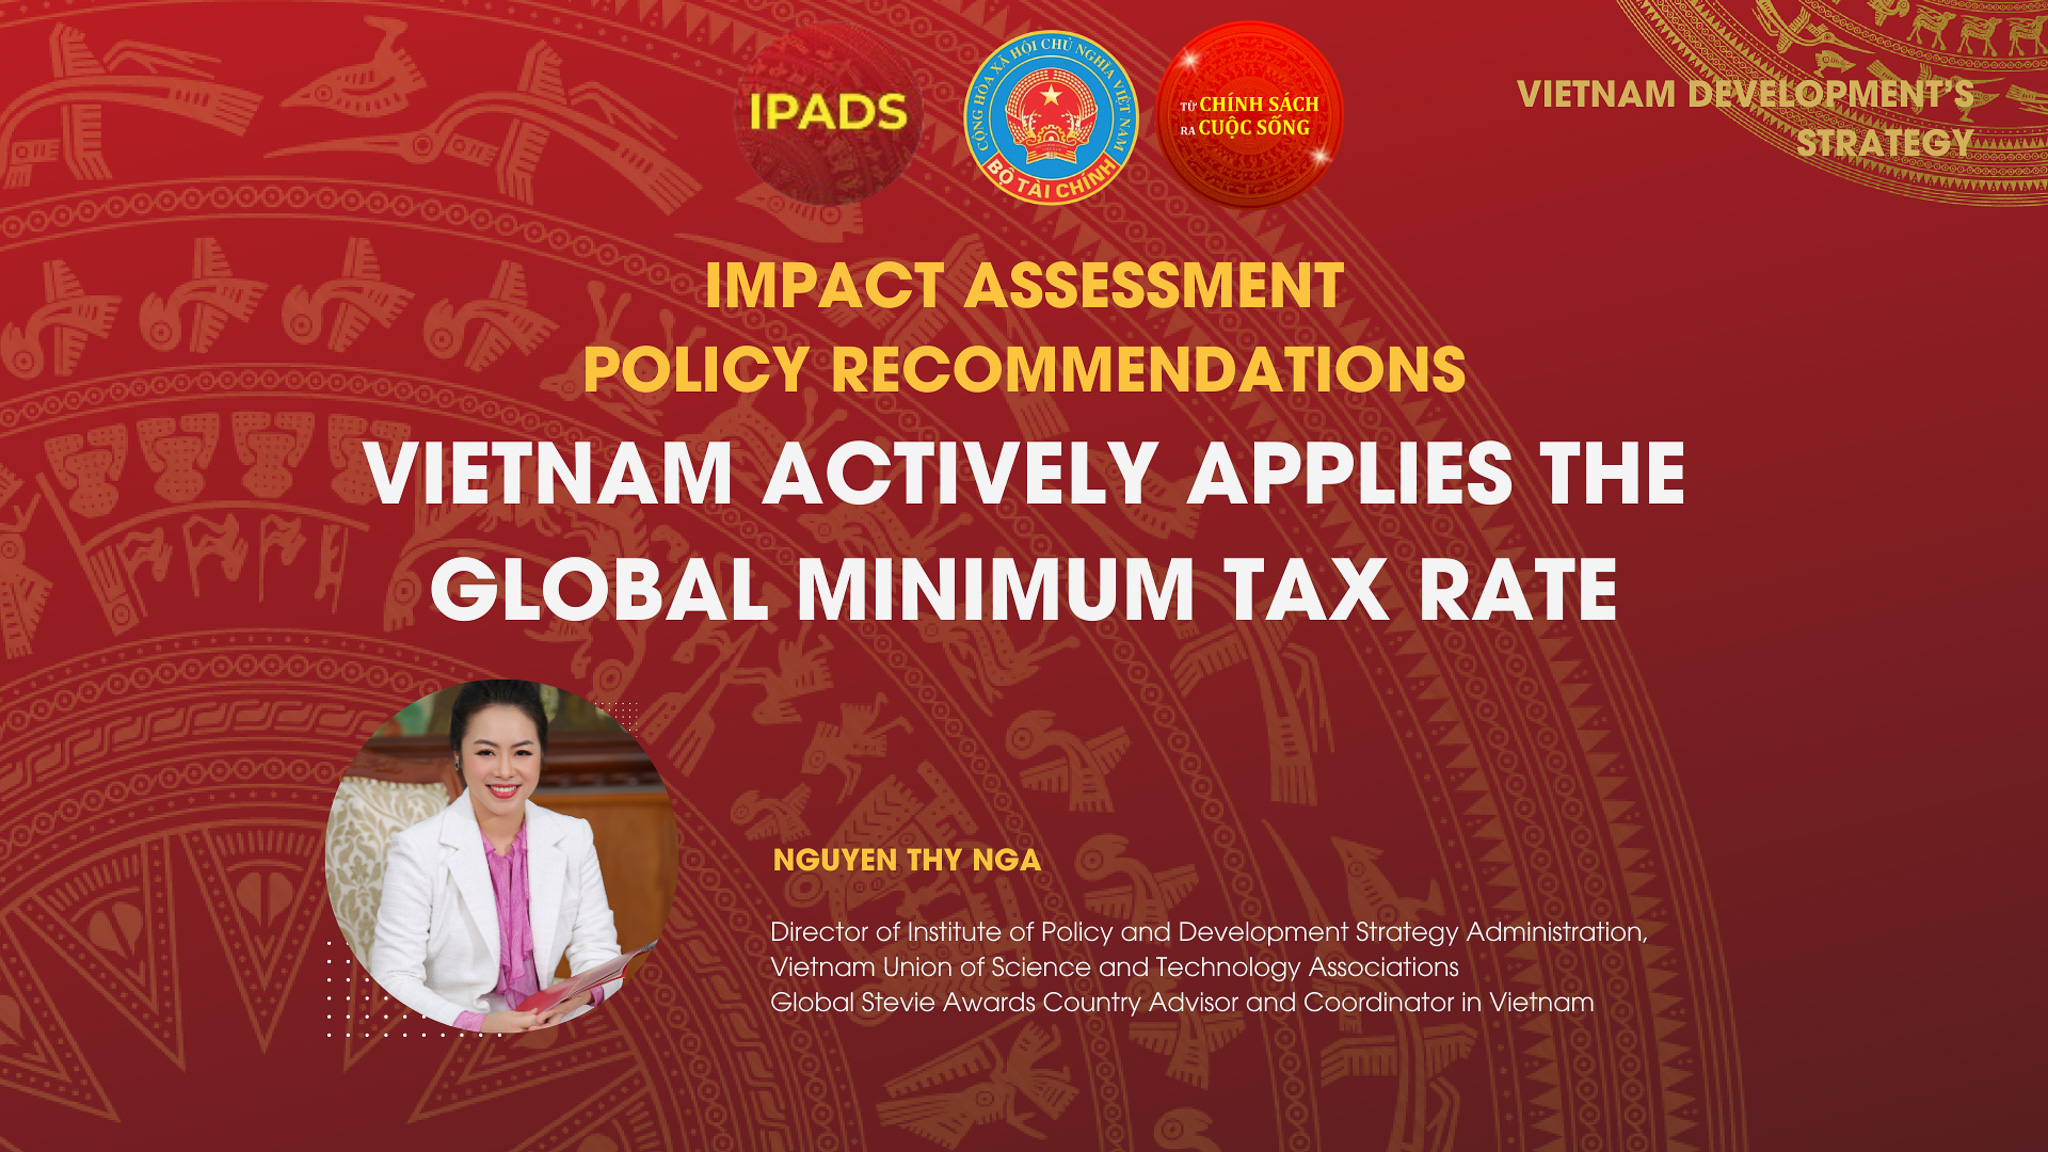 Director Nguyen Thy Nga develops Policy Science on Global Minimum Tax Rate